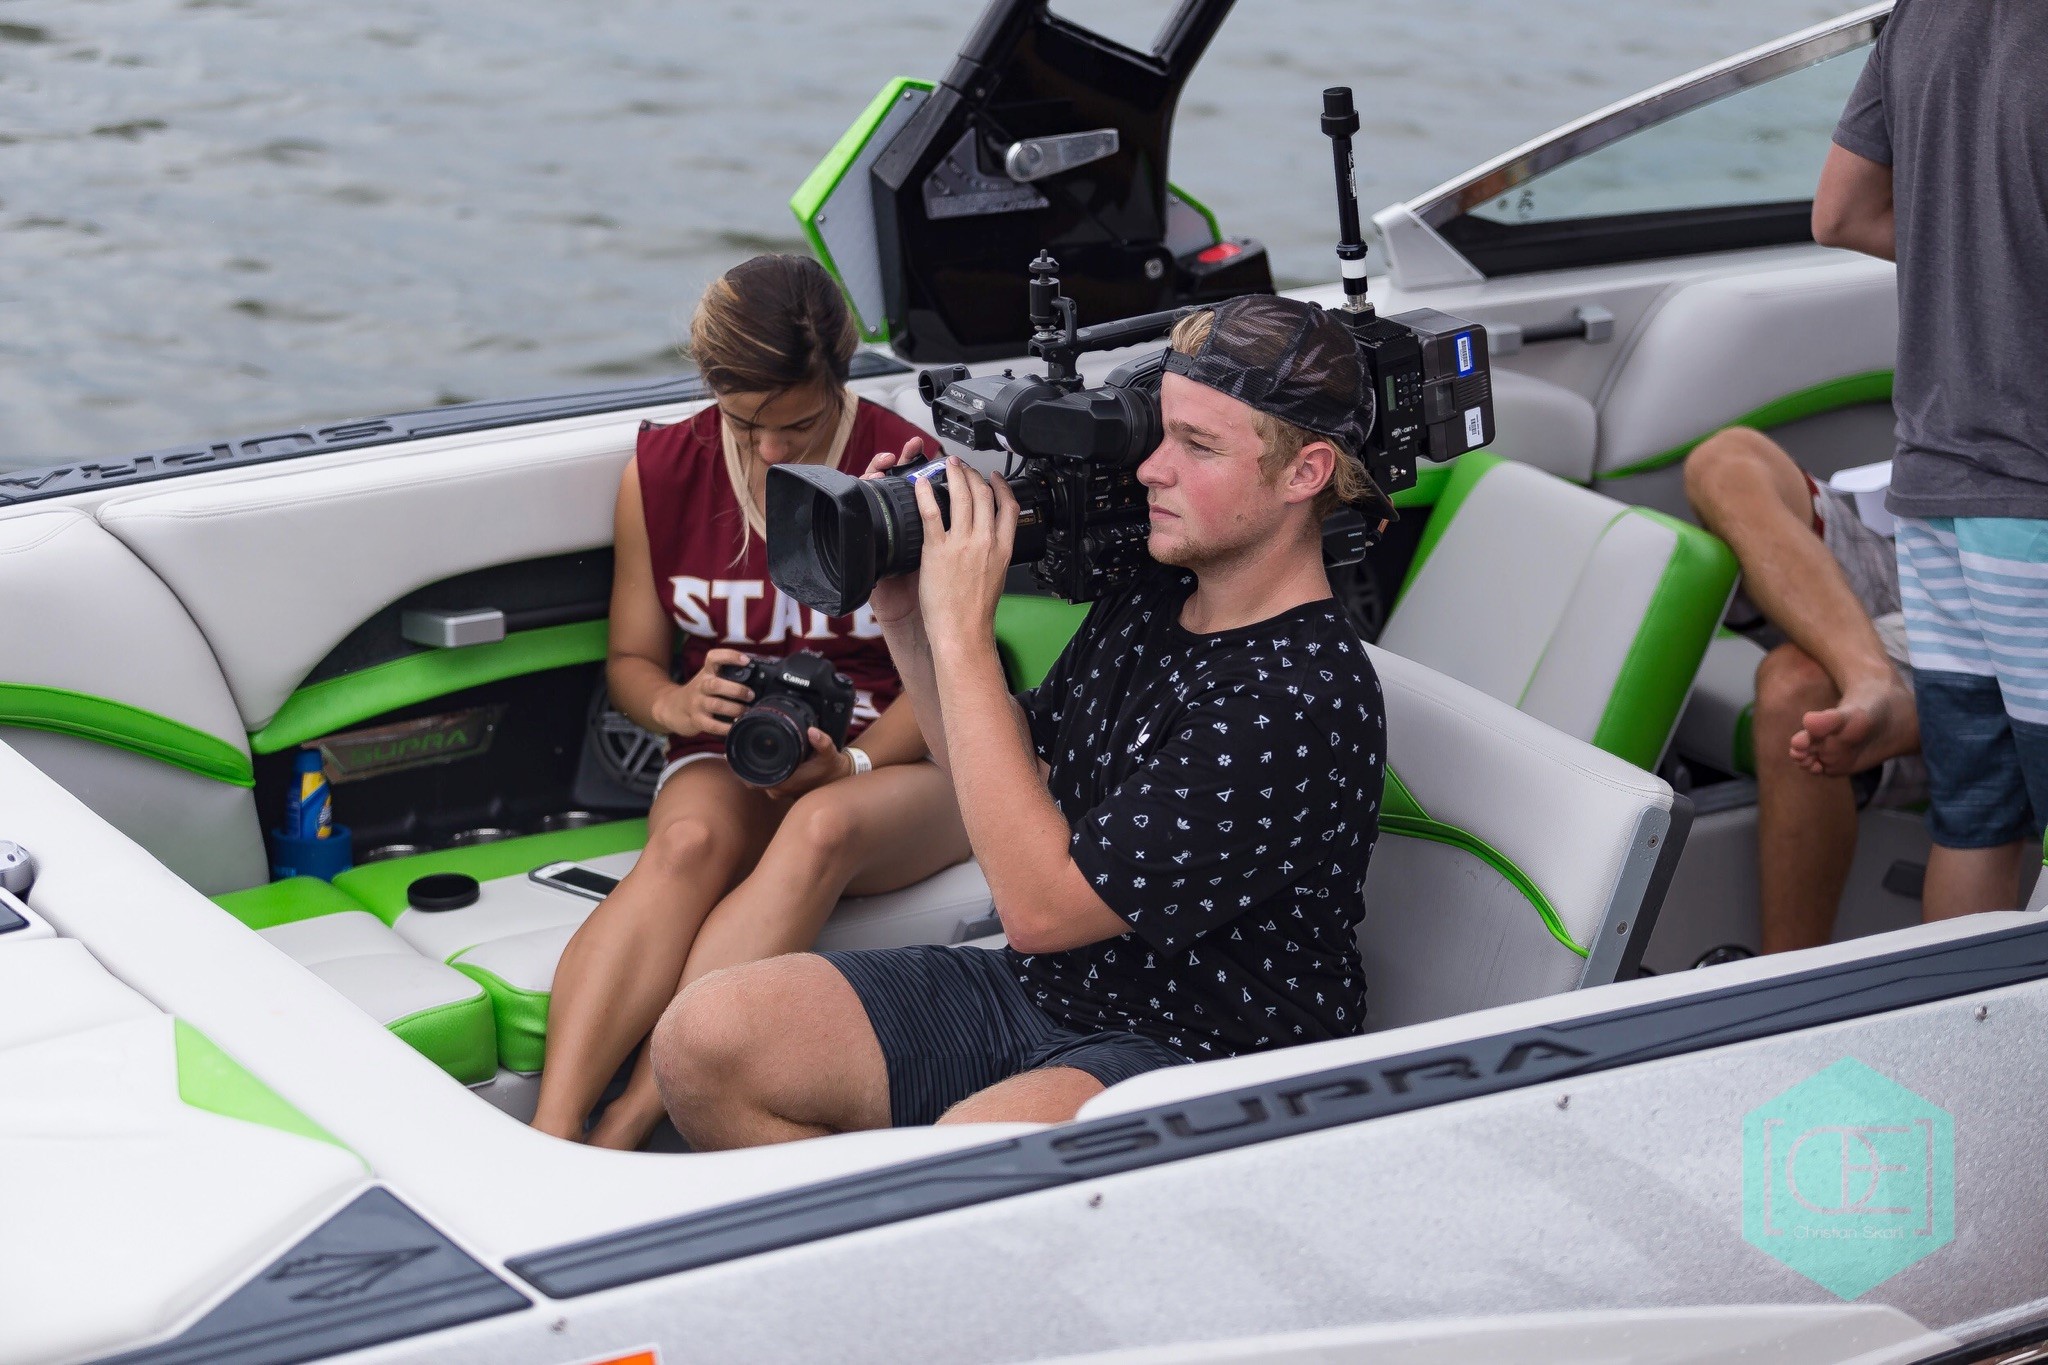 The highlight of Get Funky's live production of the Wakeboard Collegiate Nationals was a wireless camera on board the main boat pulling the competitors.